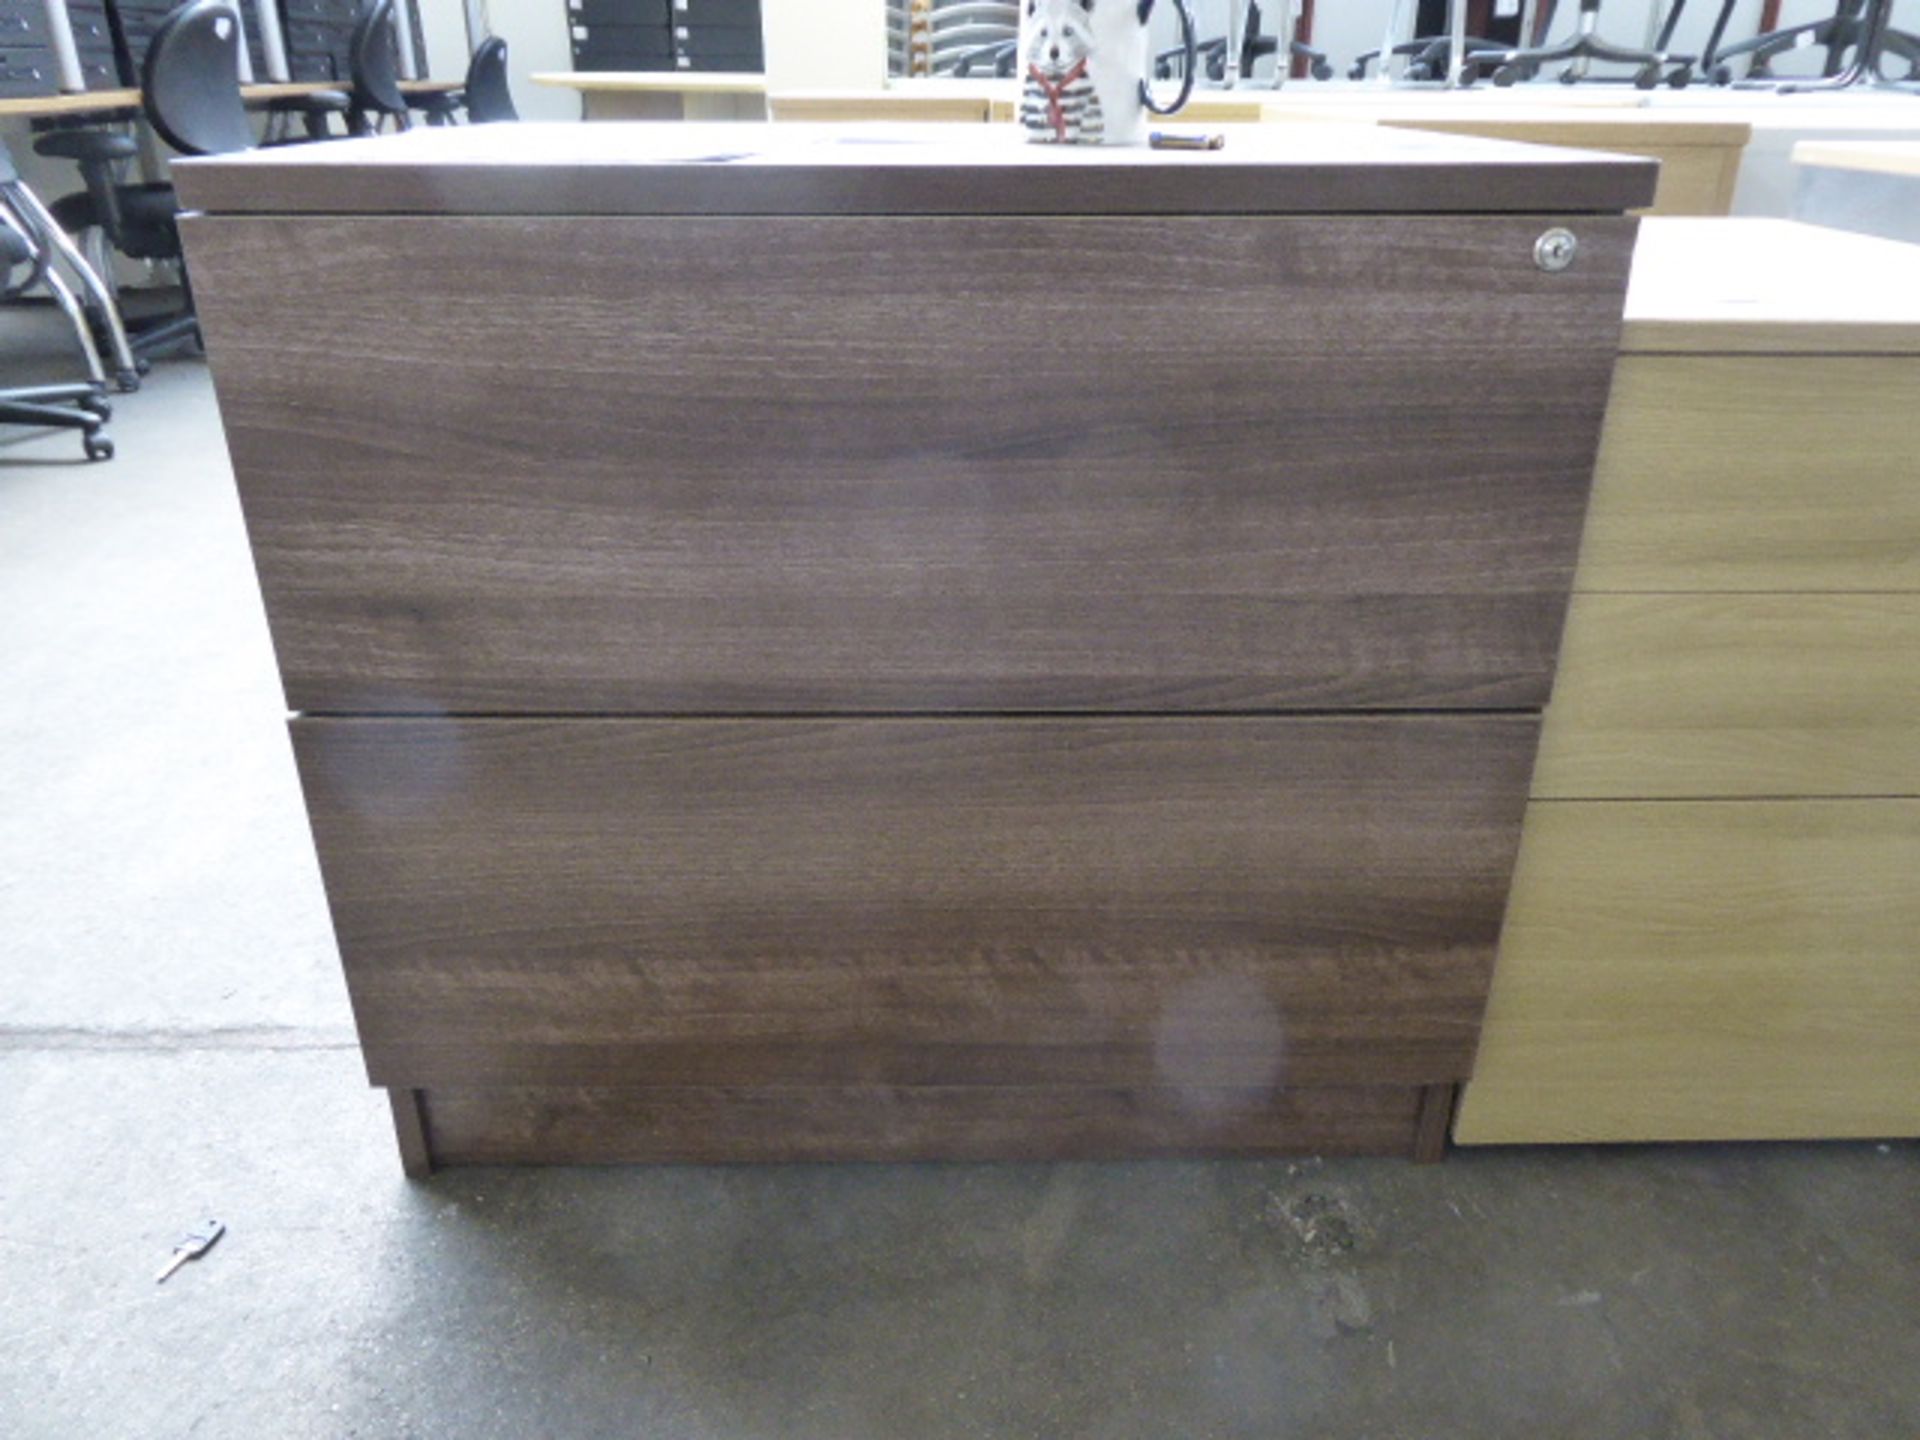 2 drawer lateral filer and a 3 drawer pedestal